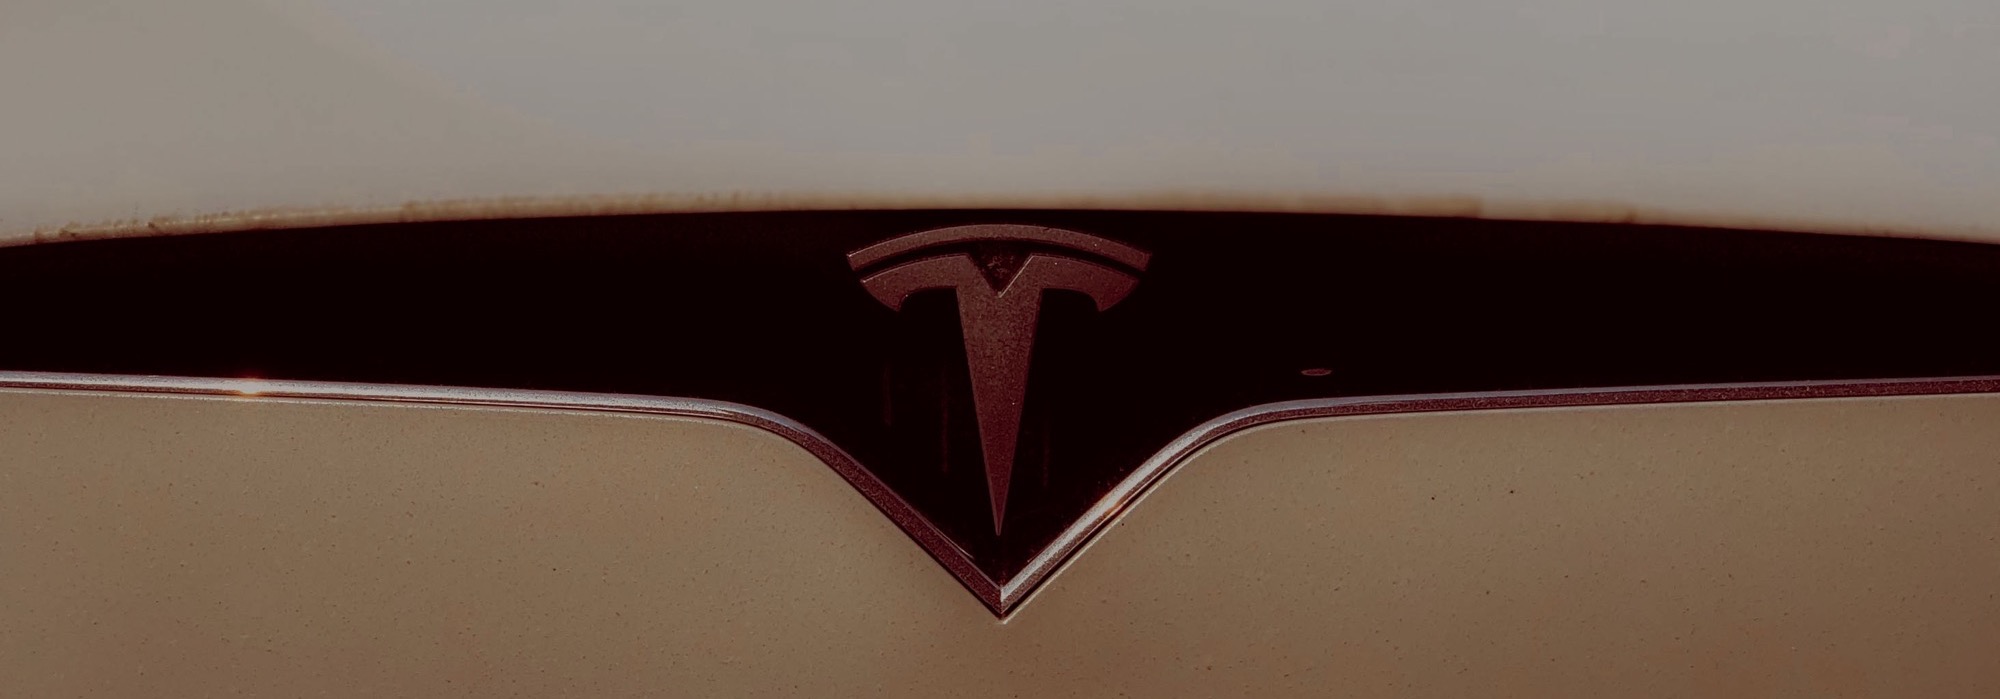 Adding Tesla to the SP500 and the EV Bubble